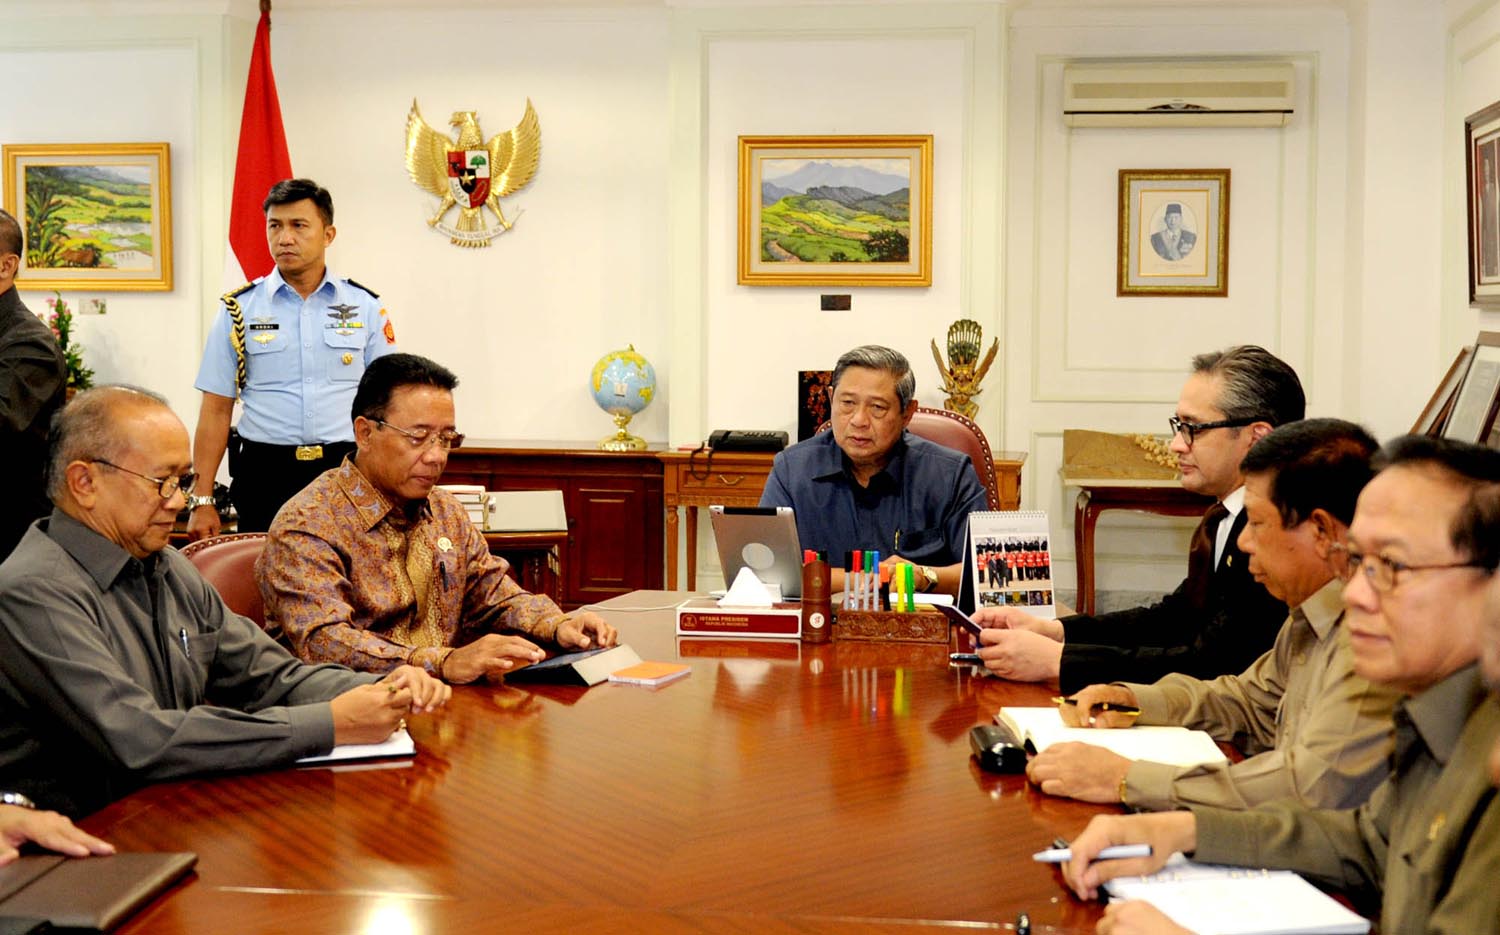 President SBY listening to progress reports on the Australian wiretapping case by the Ambassador to Australia Najdib Riphat Kesoema, at the Presidential Office on Wednesday (20/11) morning. (photo: rusman / presidenri.go.id)